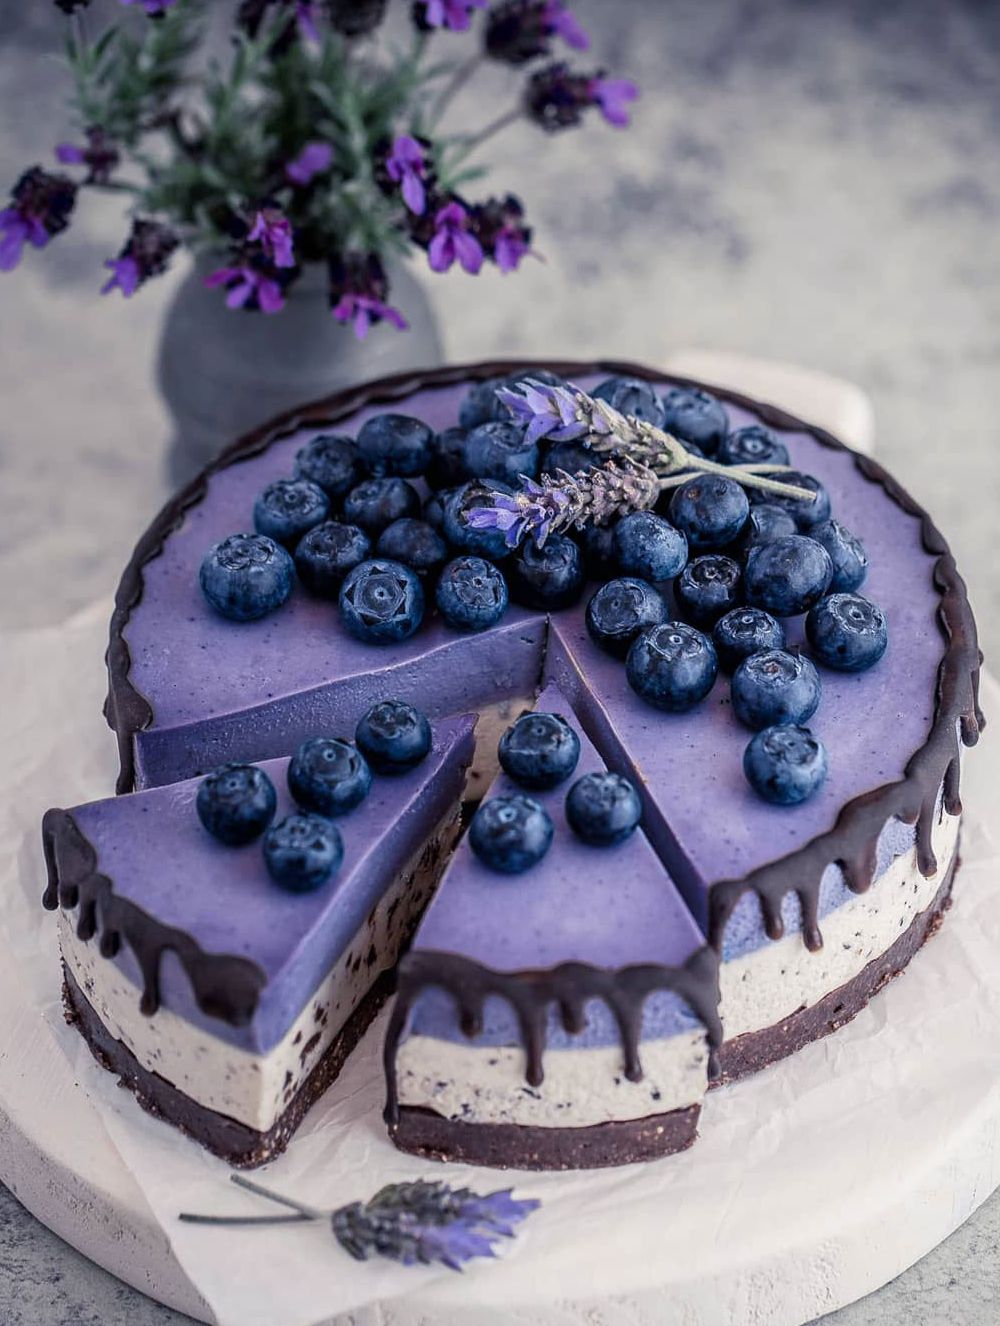 No Bake White Chocolate Coconut And Maqui Berry Cheesecake By Alltheworldisgreen Quick Easy Recipe The Feedfeed